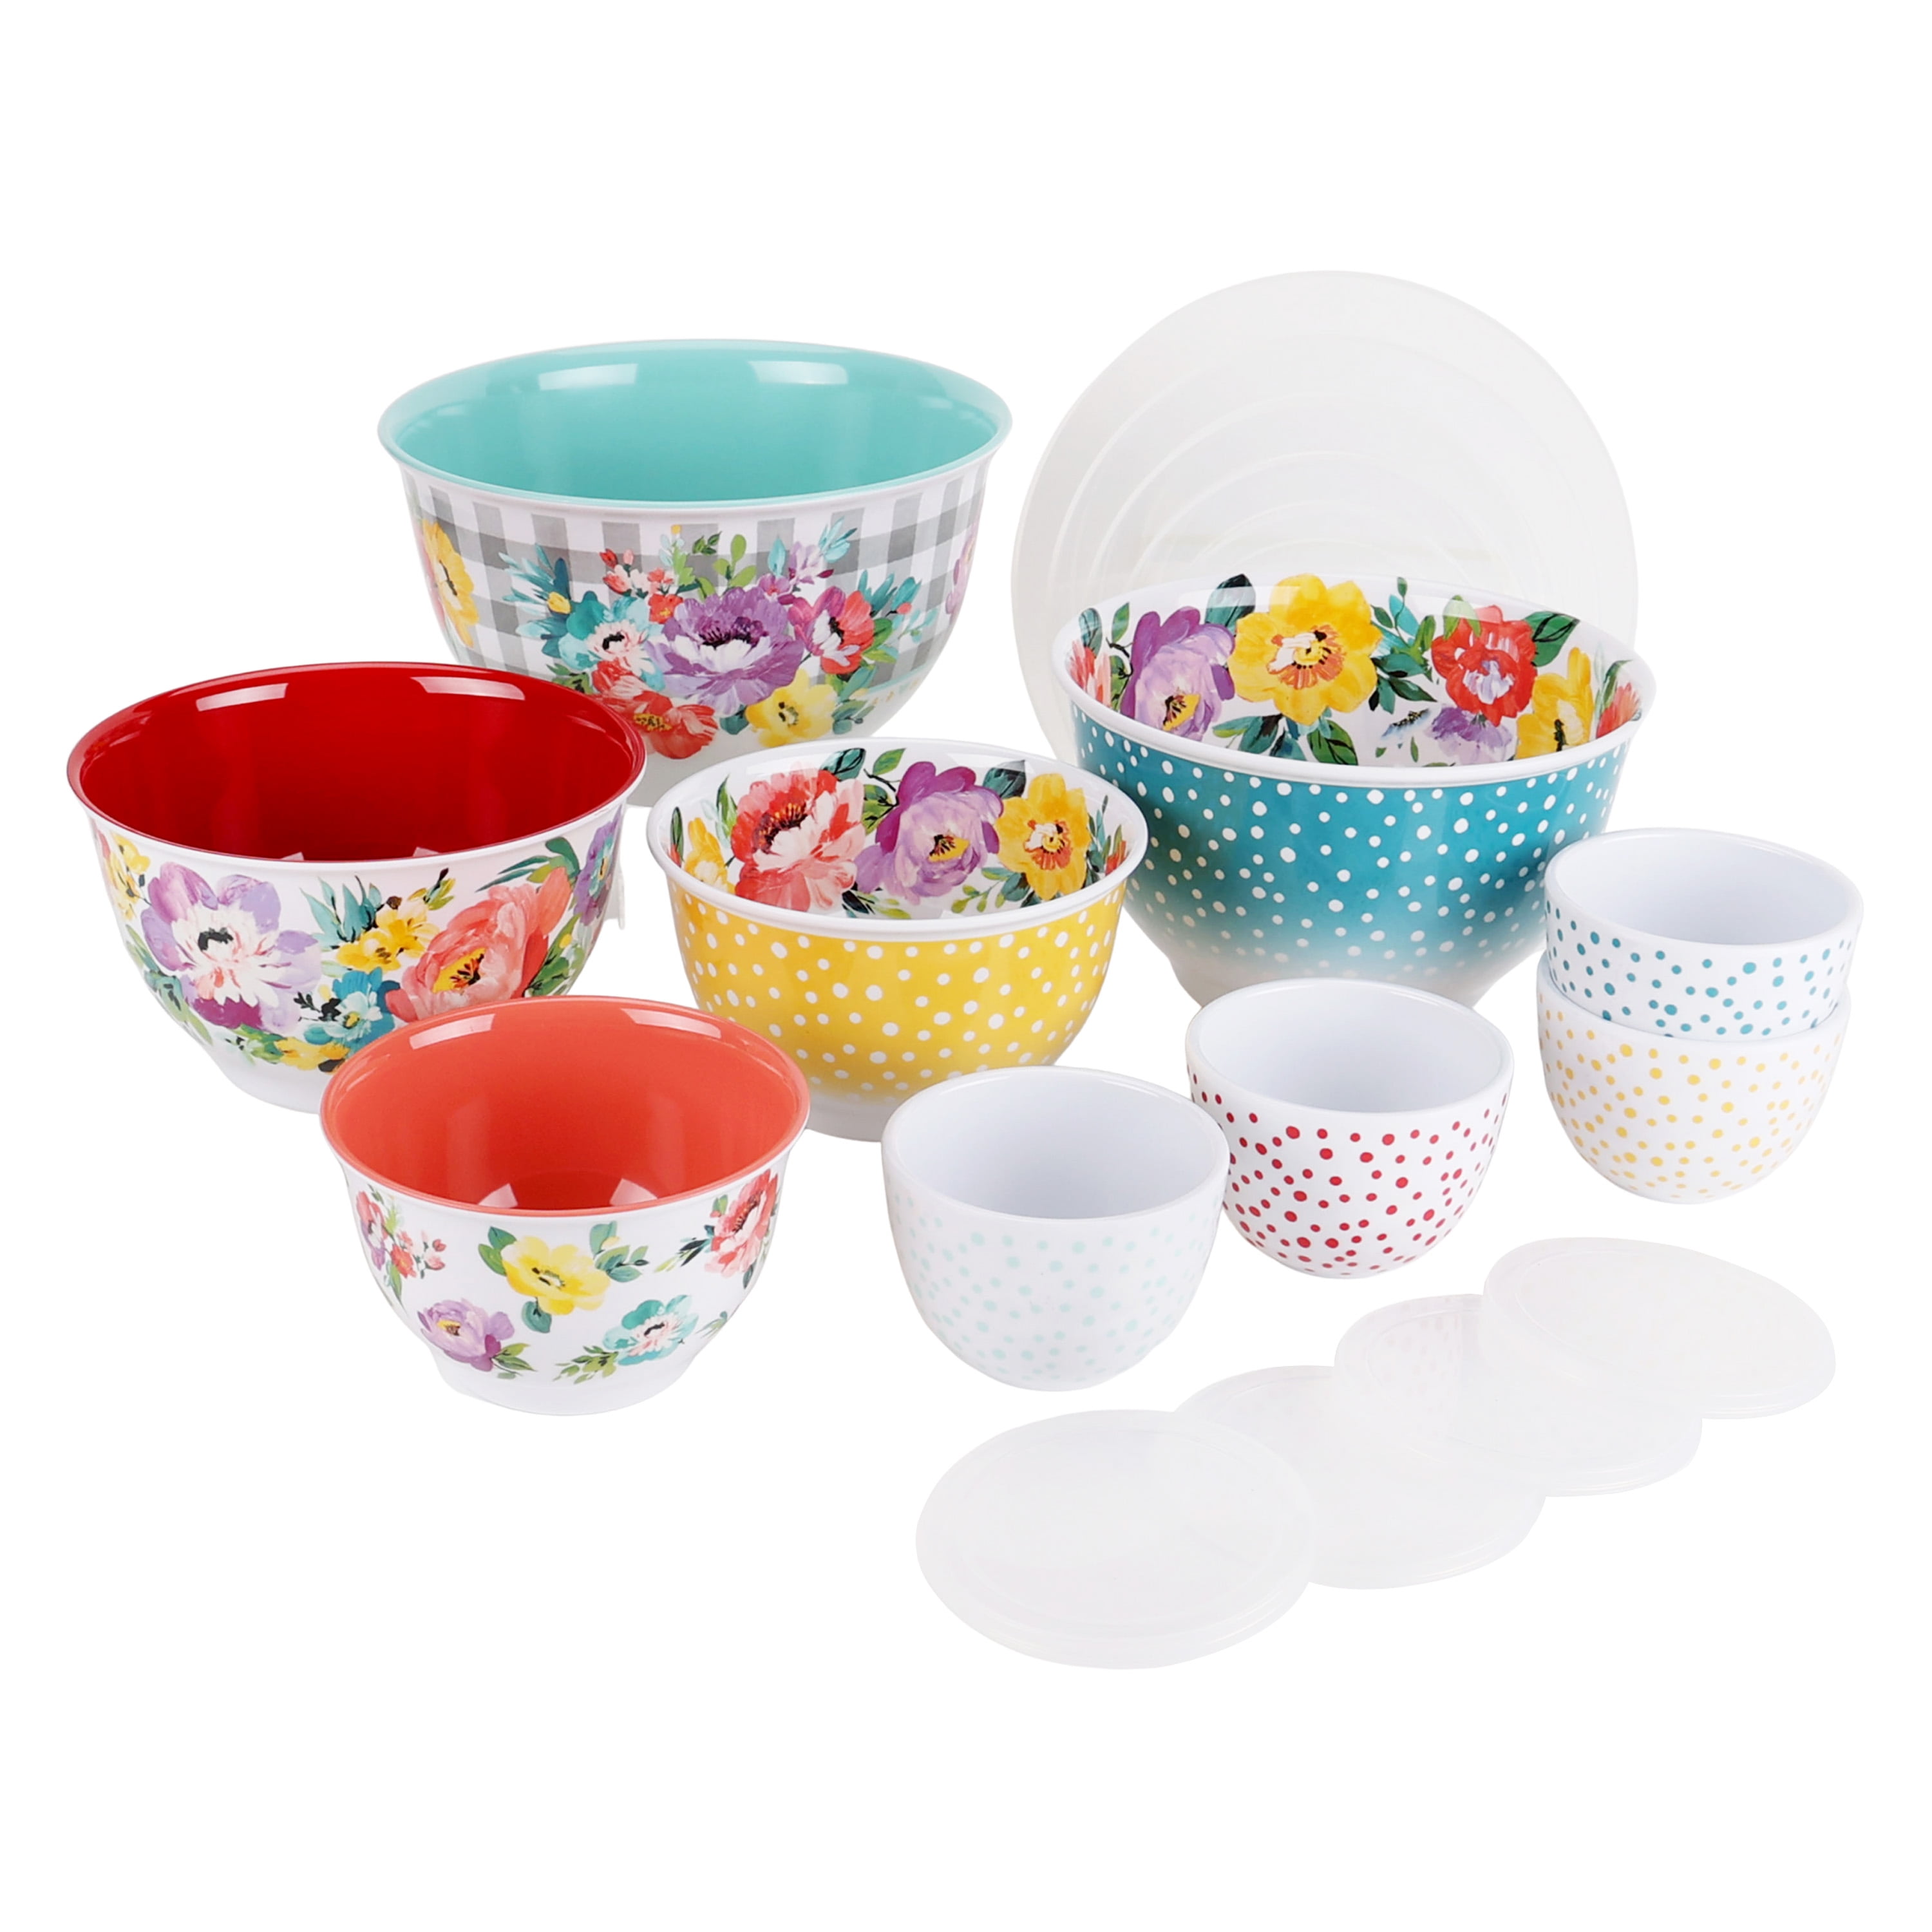 18-PC Set The Pioneer Woman Mixing Bowl Set with Lids $14.72 + Free S&H w/ Walmart+ or $35+